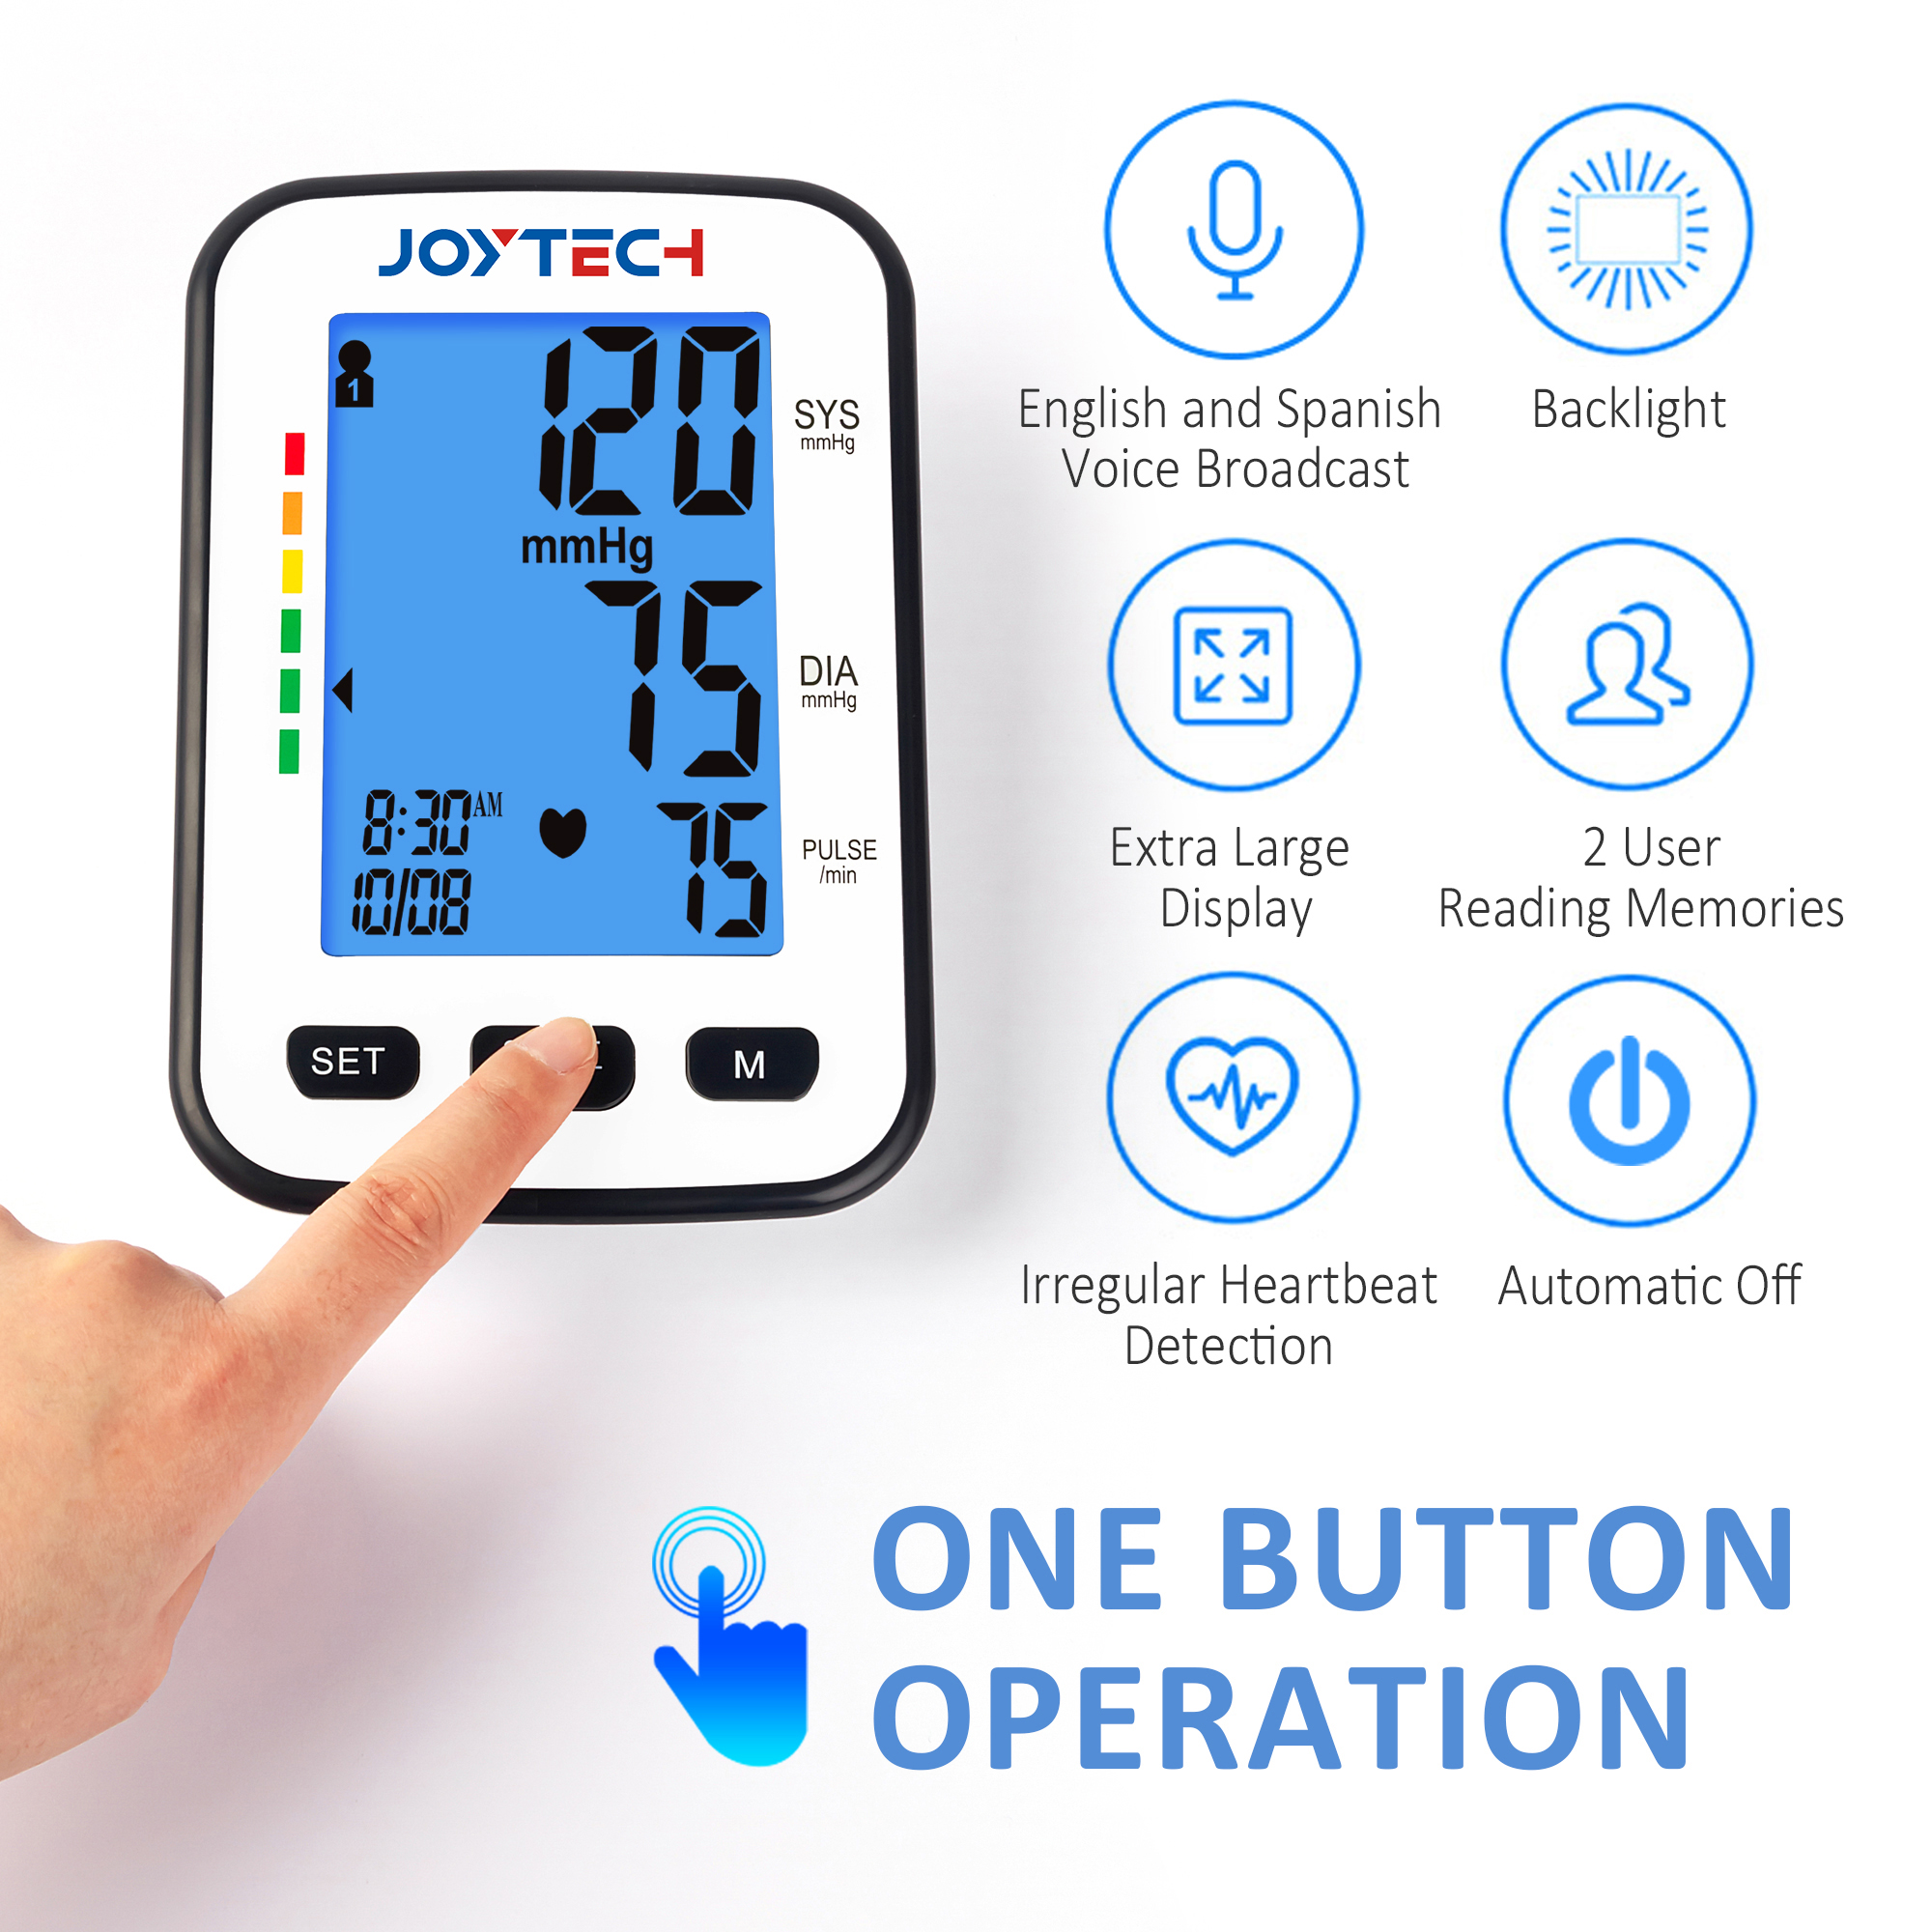 MDR CE Extra LCD Display Bluetooth Blood Pressure Monitor na may Backlit